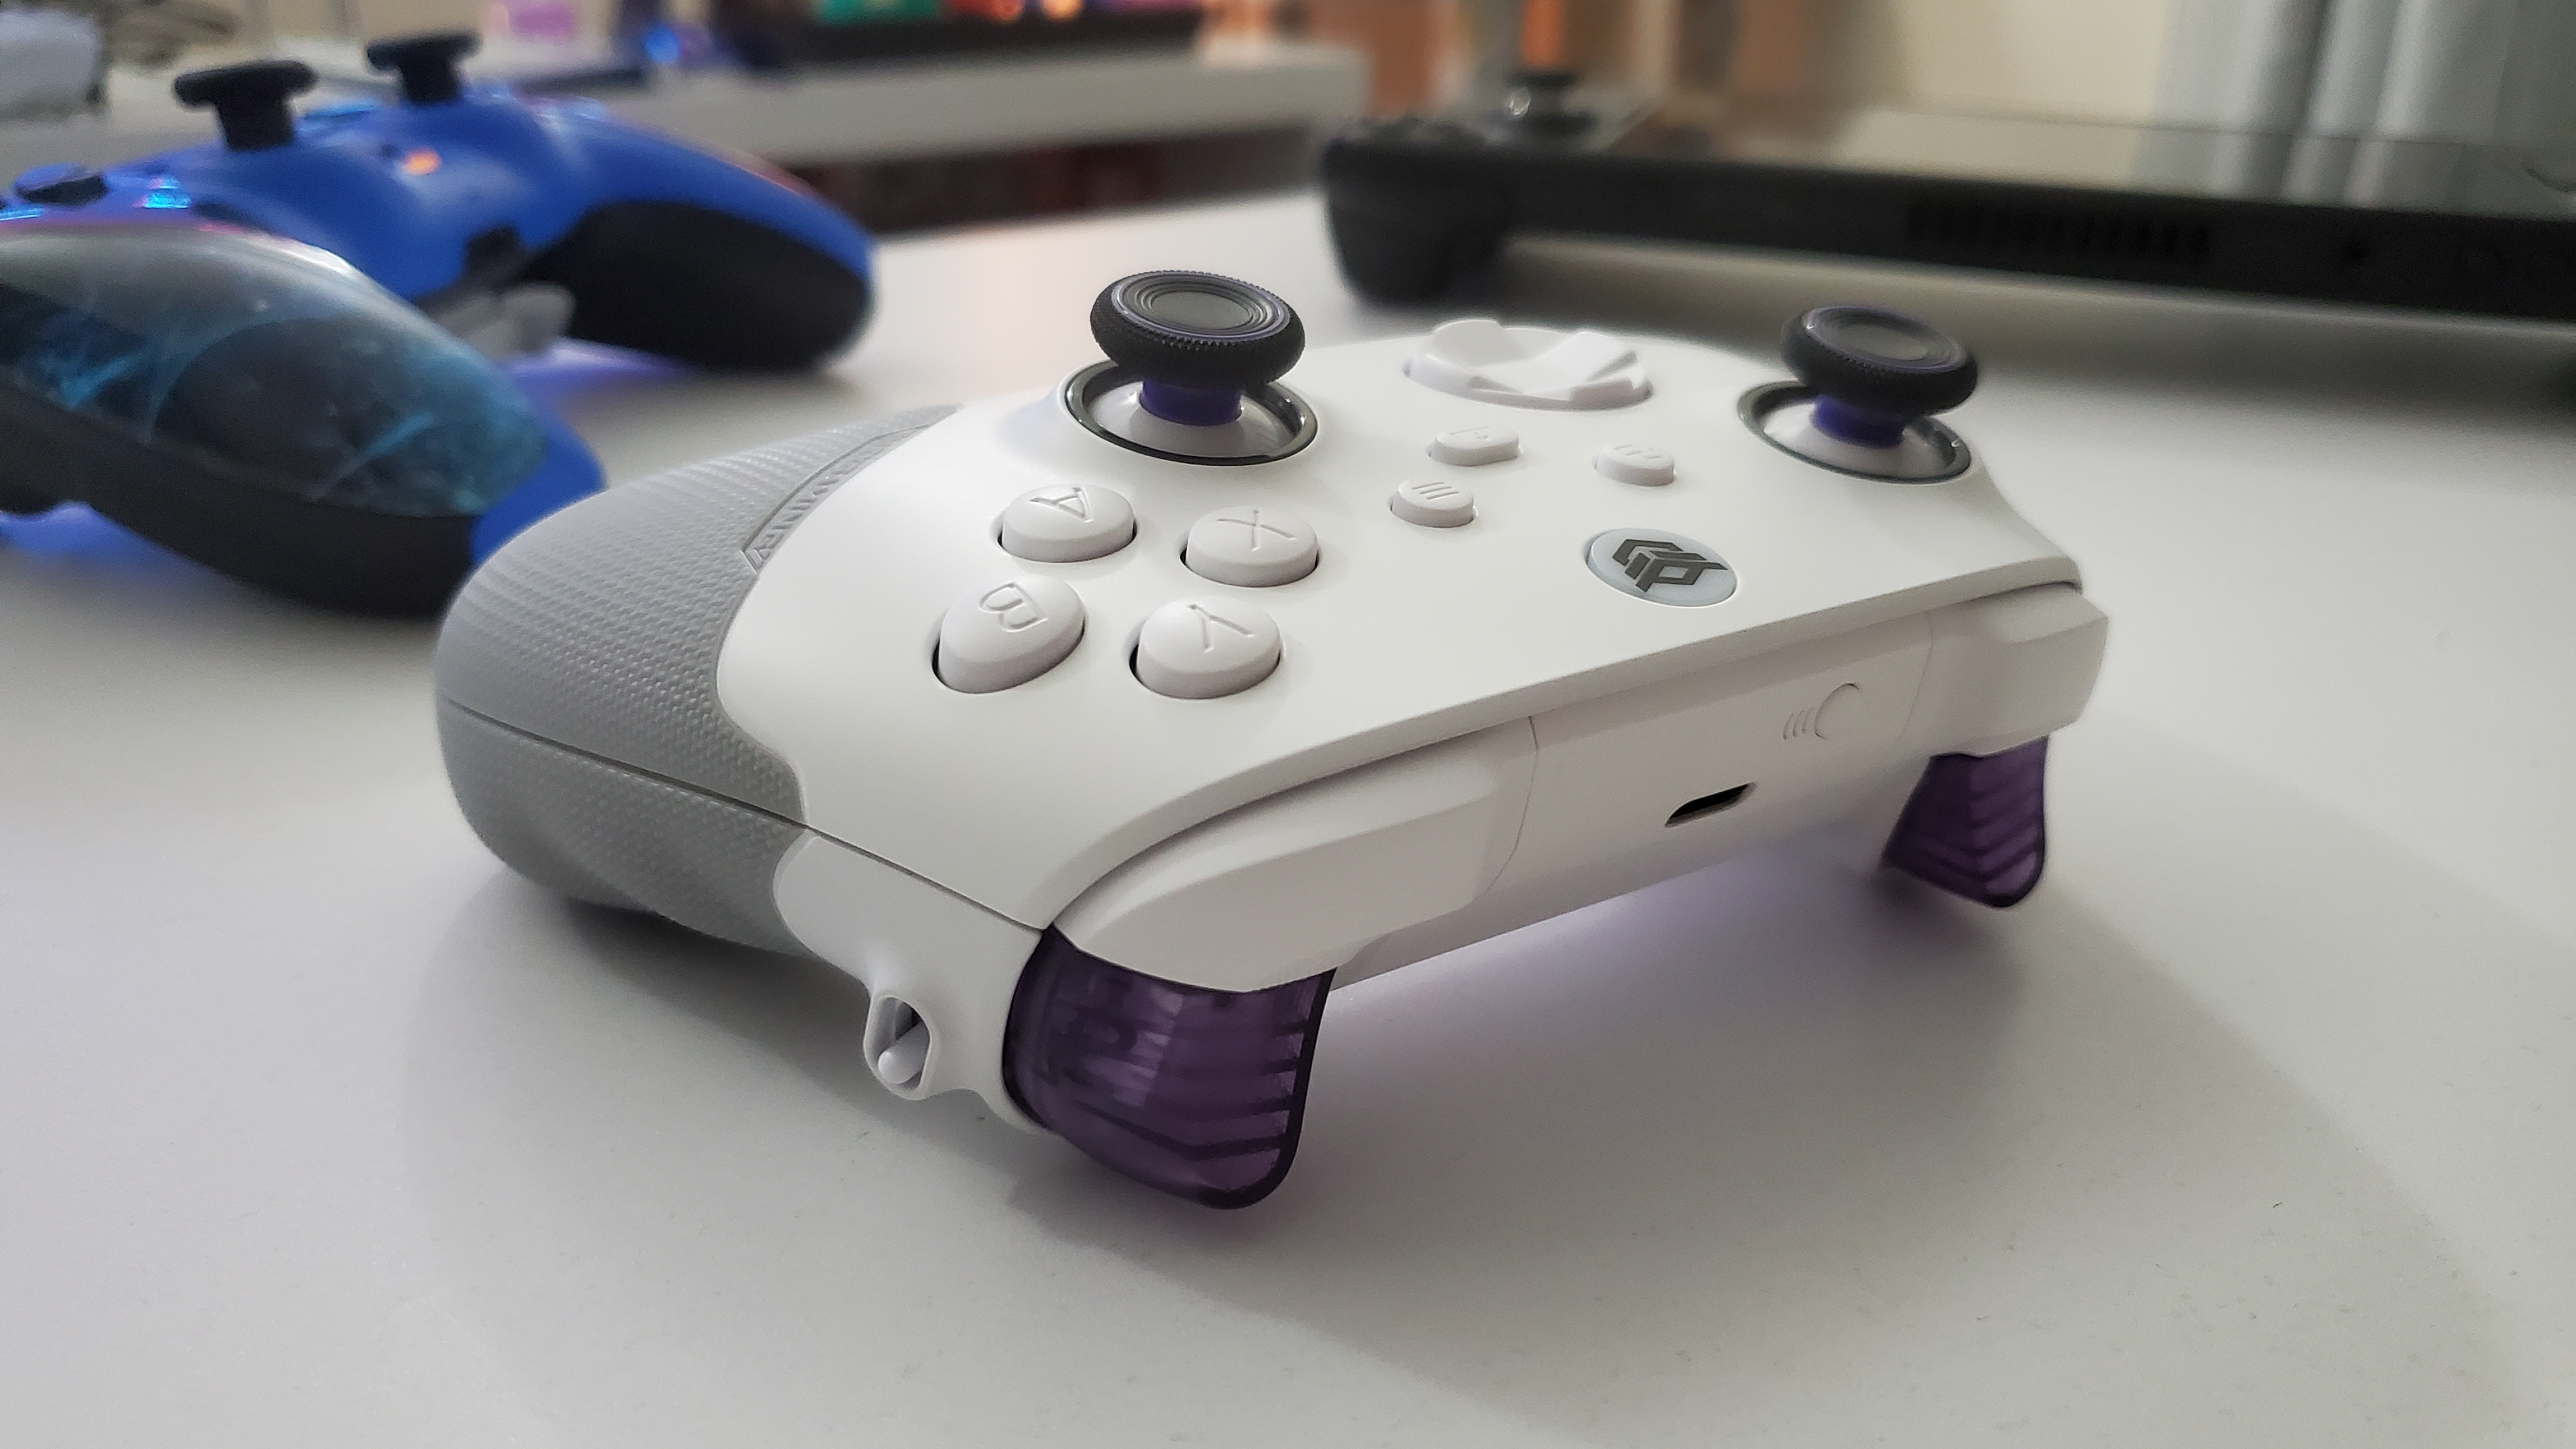 HexGaming Ultra X review: A pro Xbox controller great for